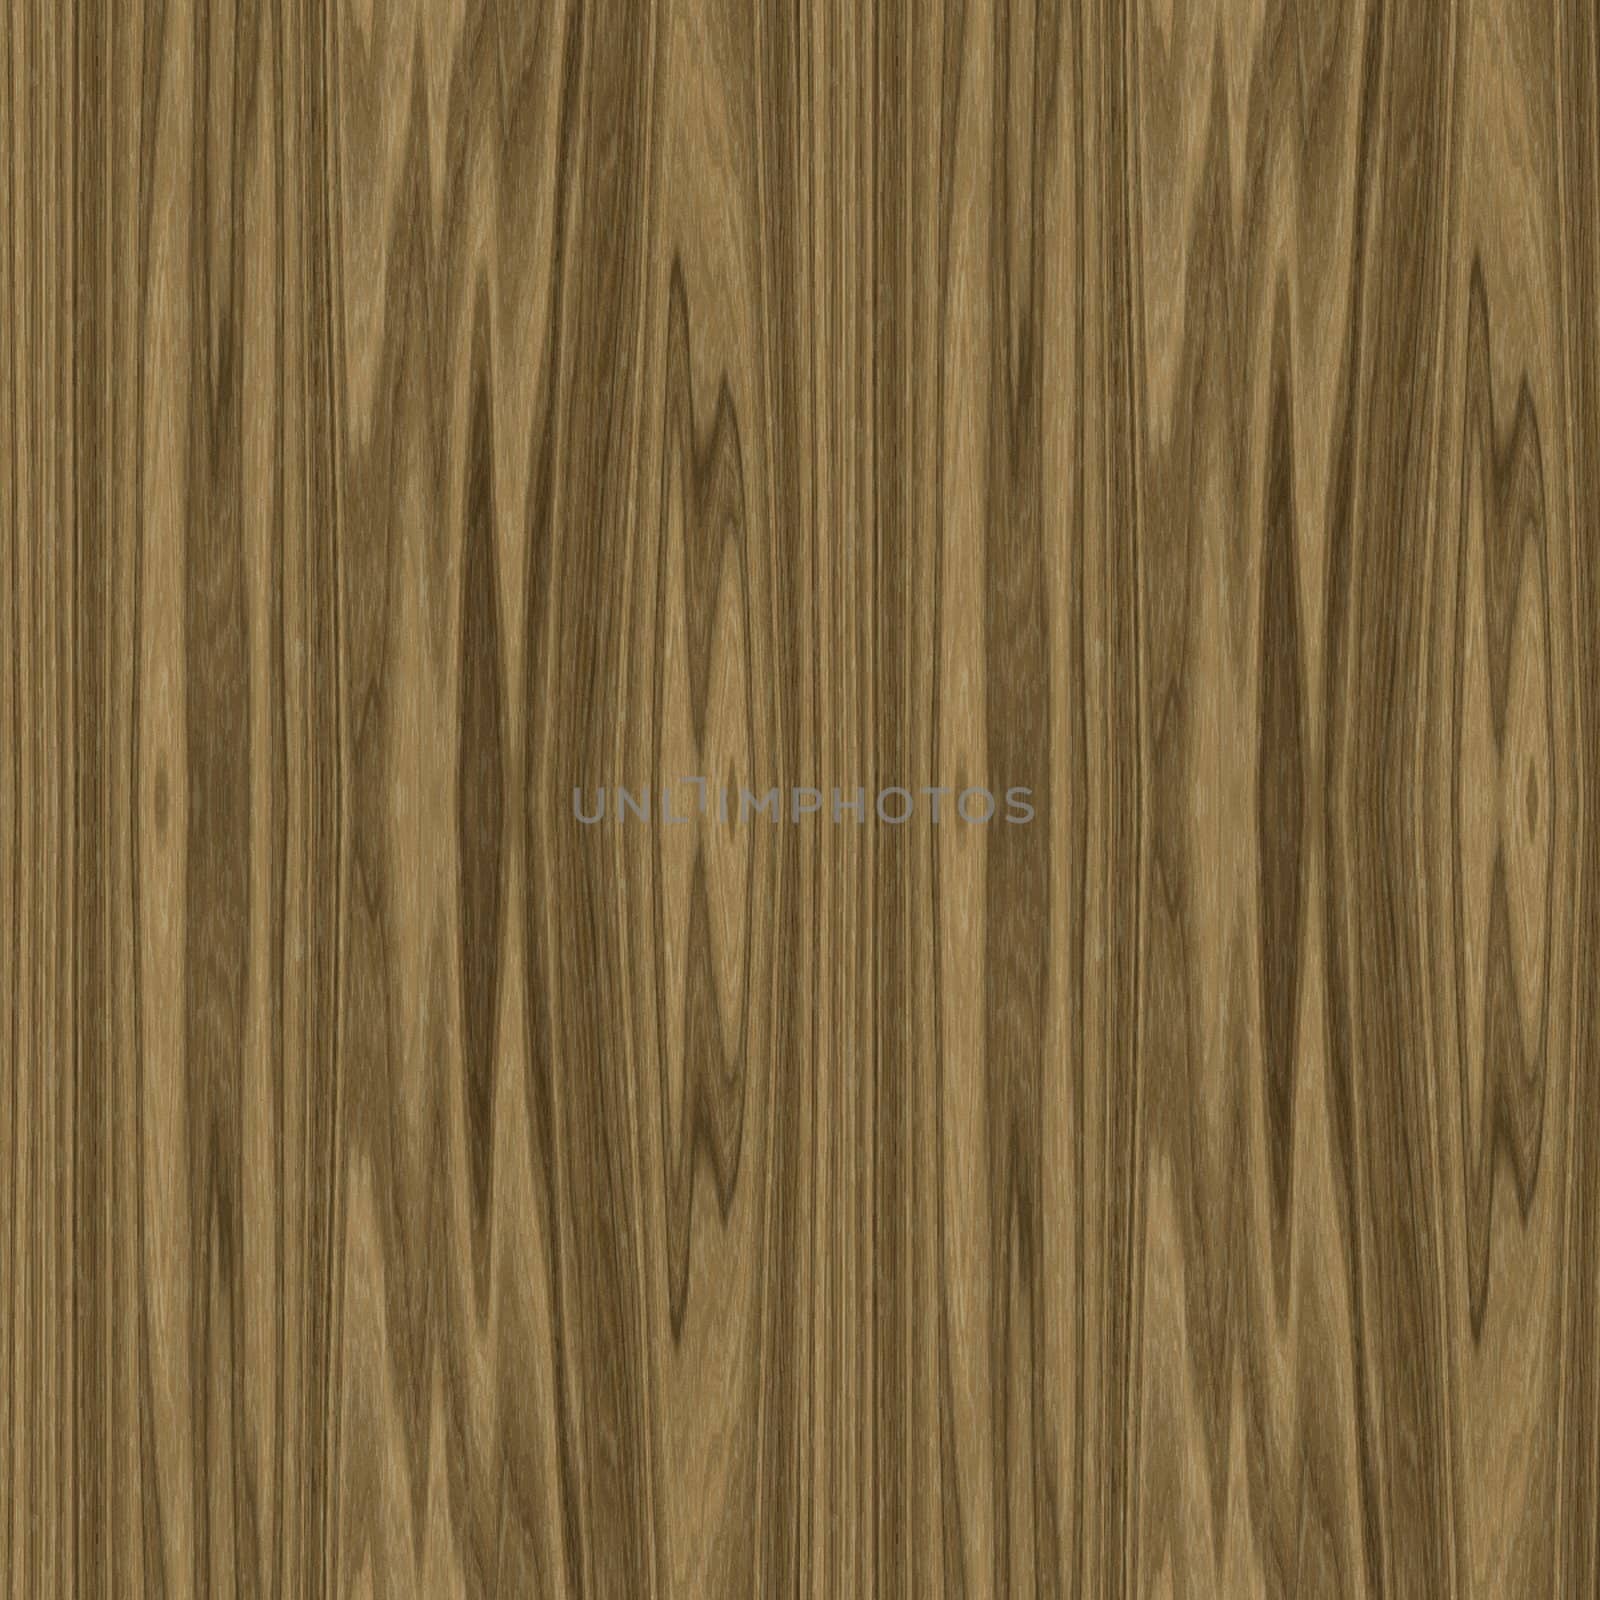 Image of wood processed by special solution which gives to her imitation of an old age. Seamless texture.